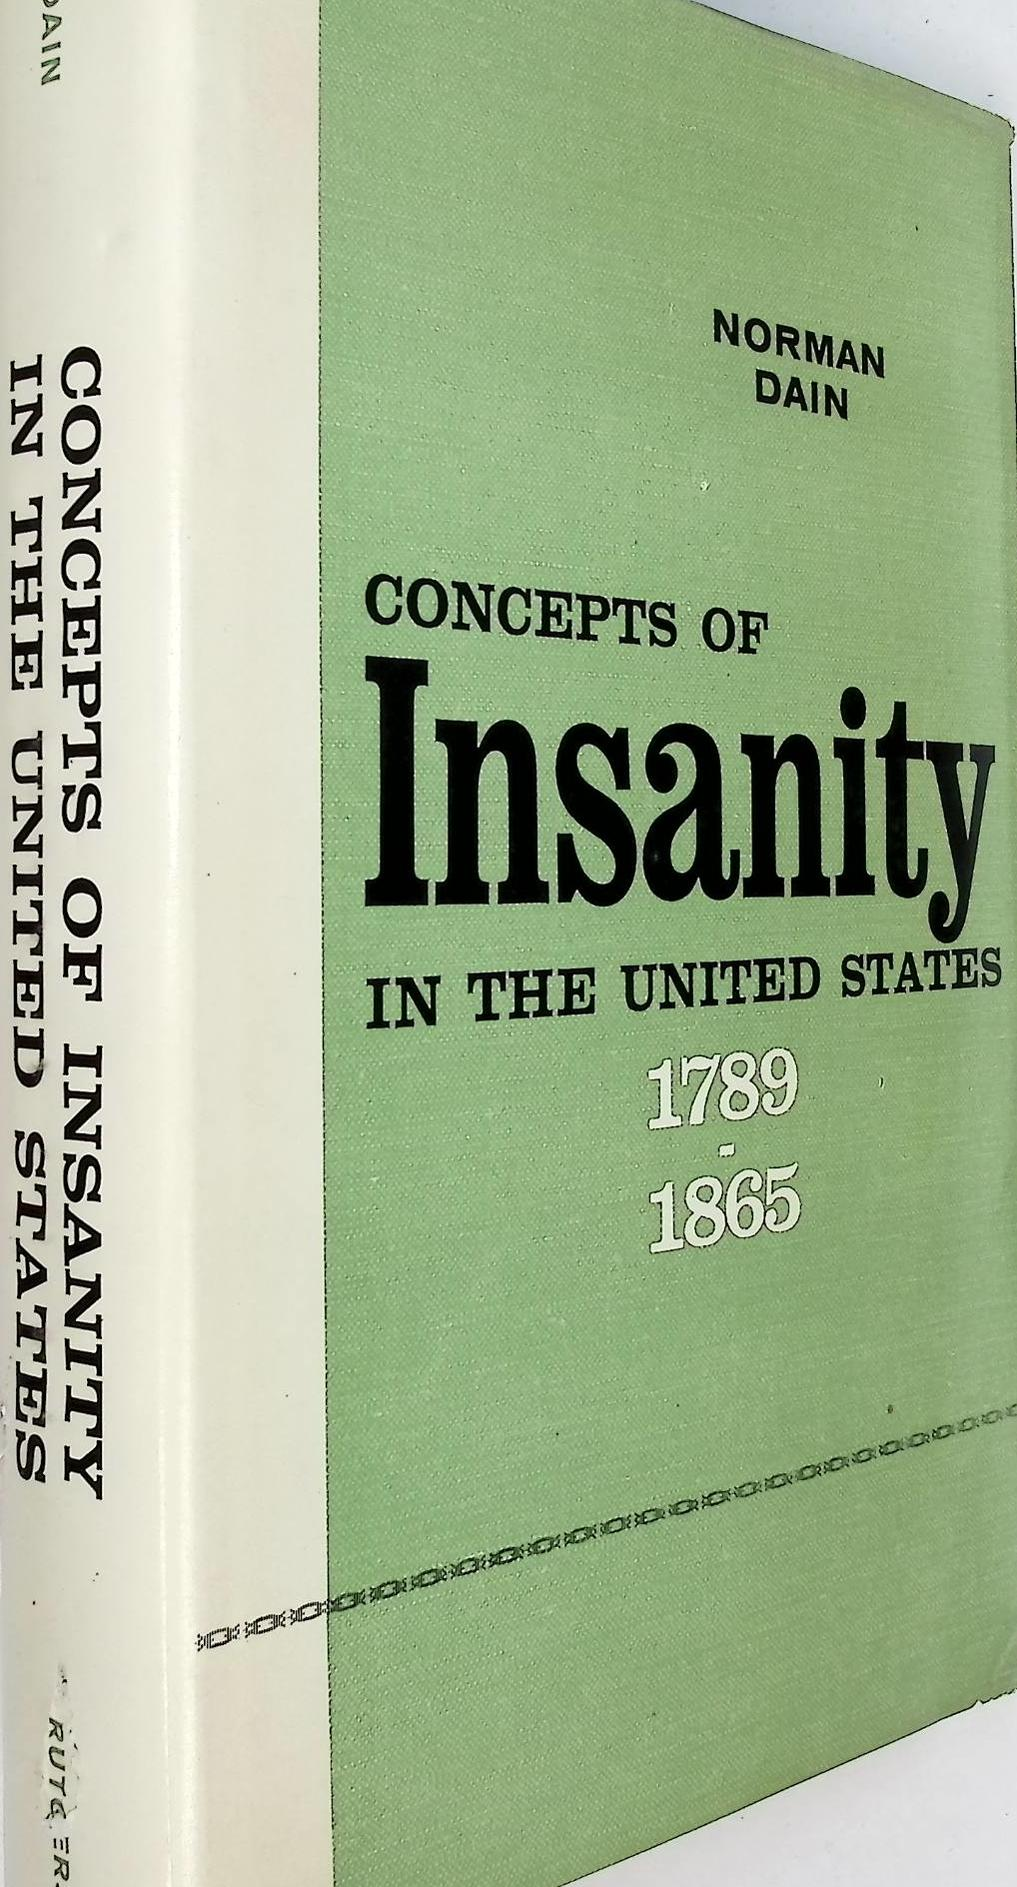 Concepts of Insanity in the United States 1789-1865